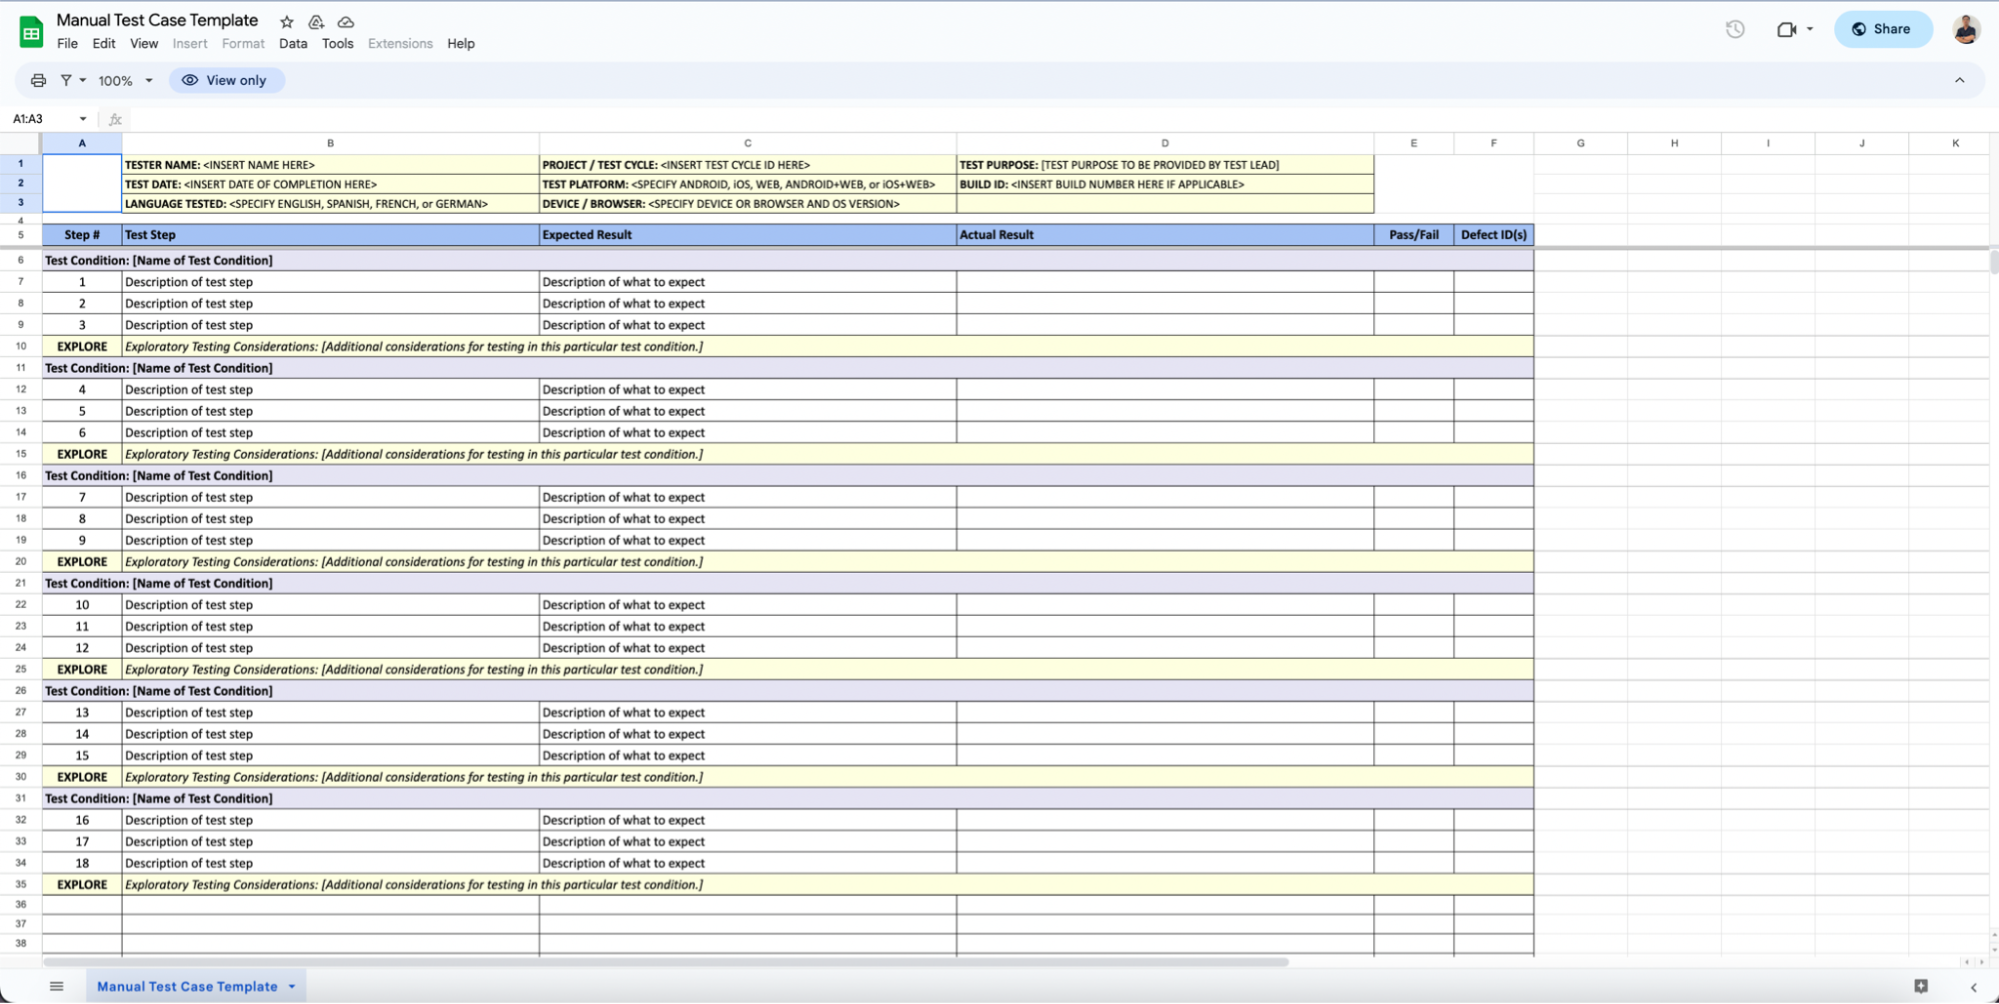 Test Case Management template on Google Sheets for manual testing